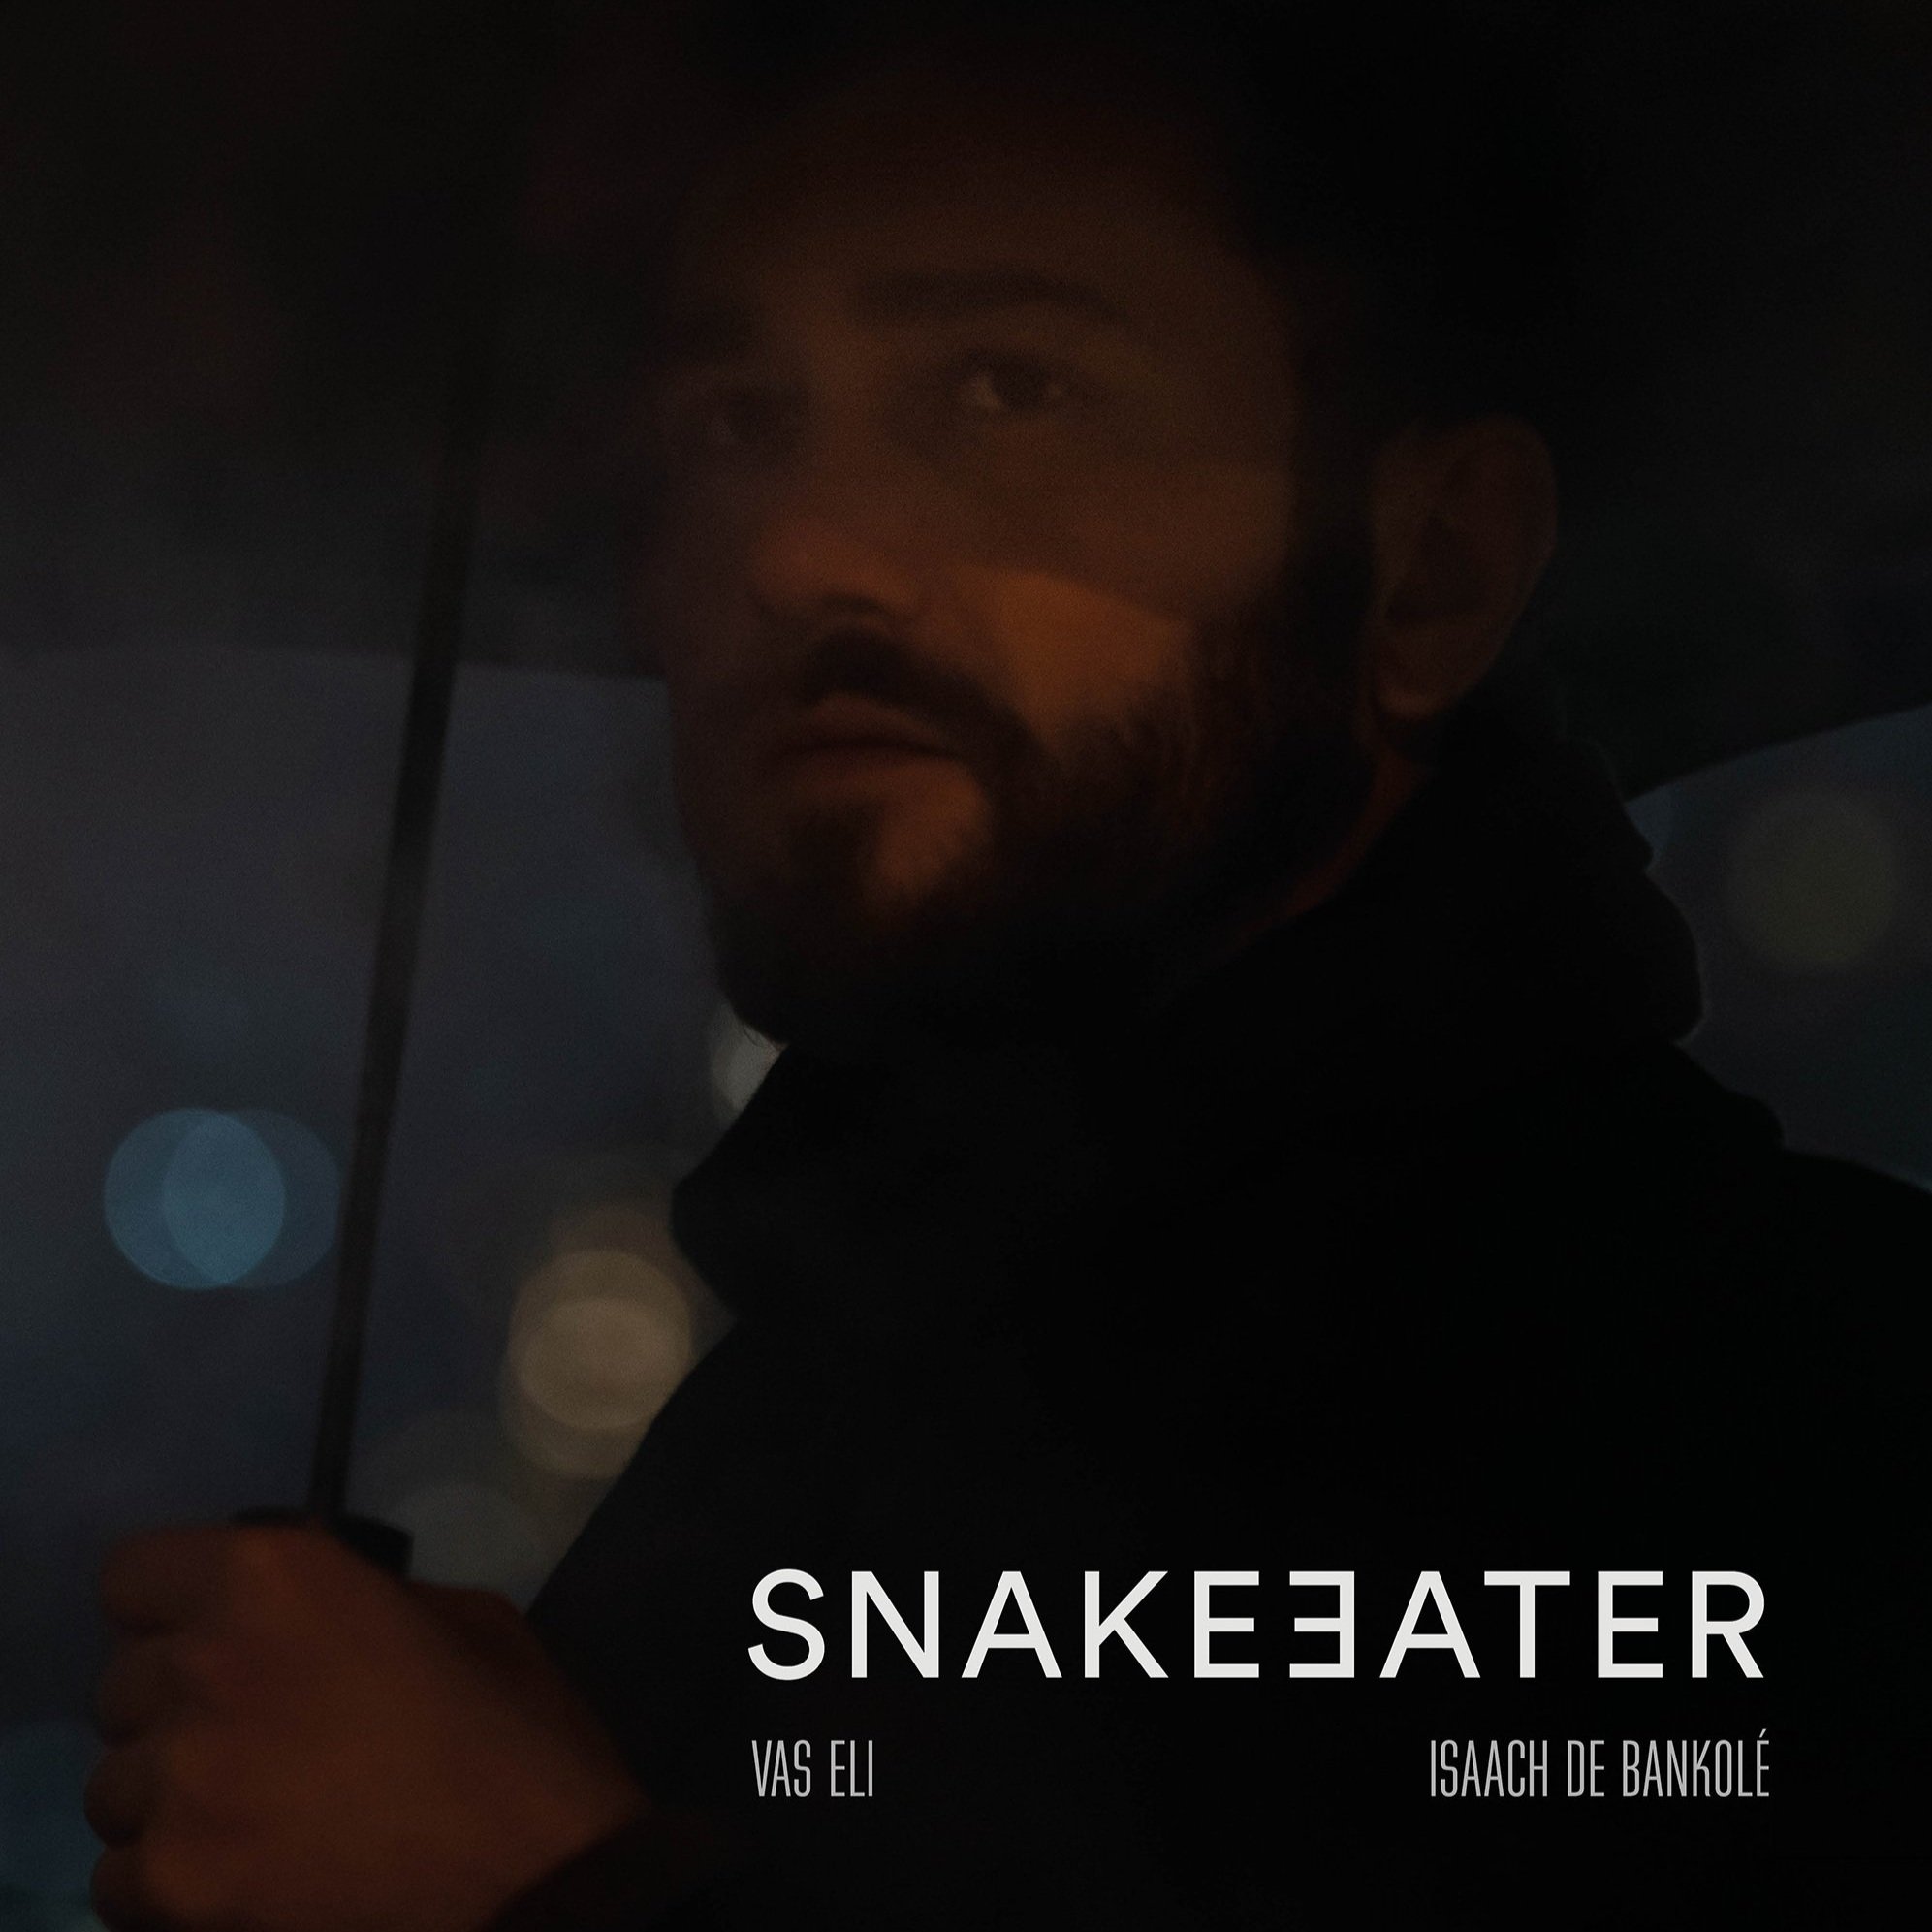 Snakeeater - Tore Knos